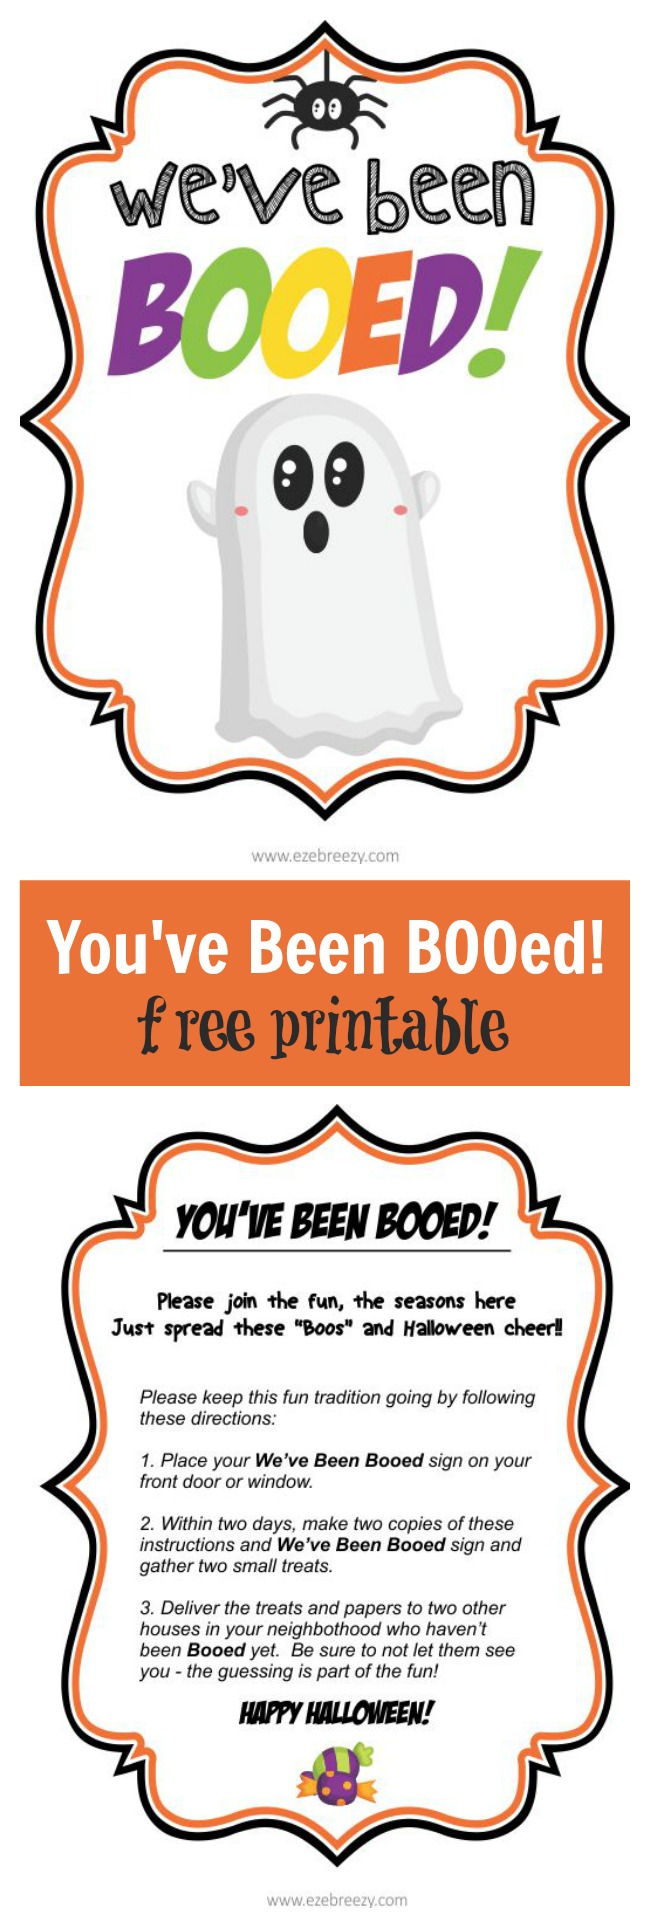 FREE Halloween Printable - You've Been Booed Printable. Nothing puts a smile on a kids face than finding a You've Been BOOed surprise at the front door! | ezeBreezy.com